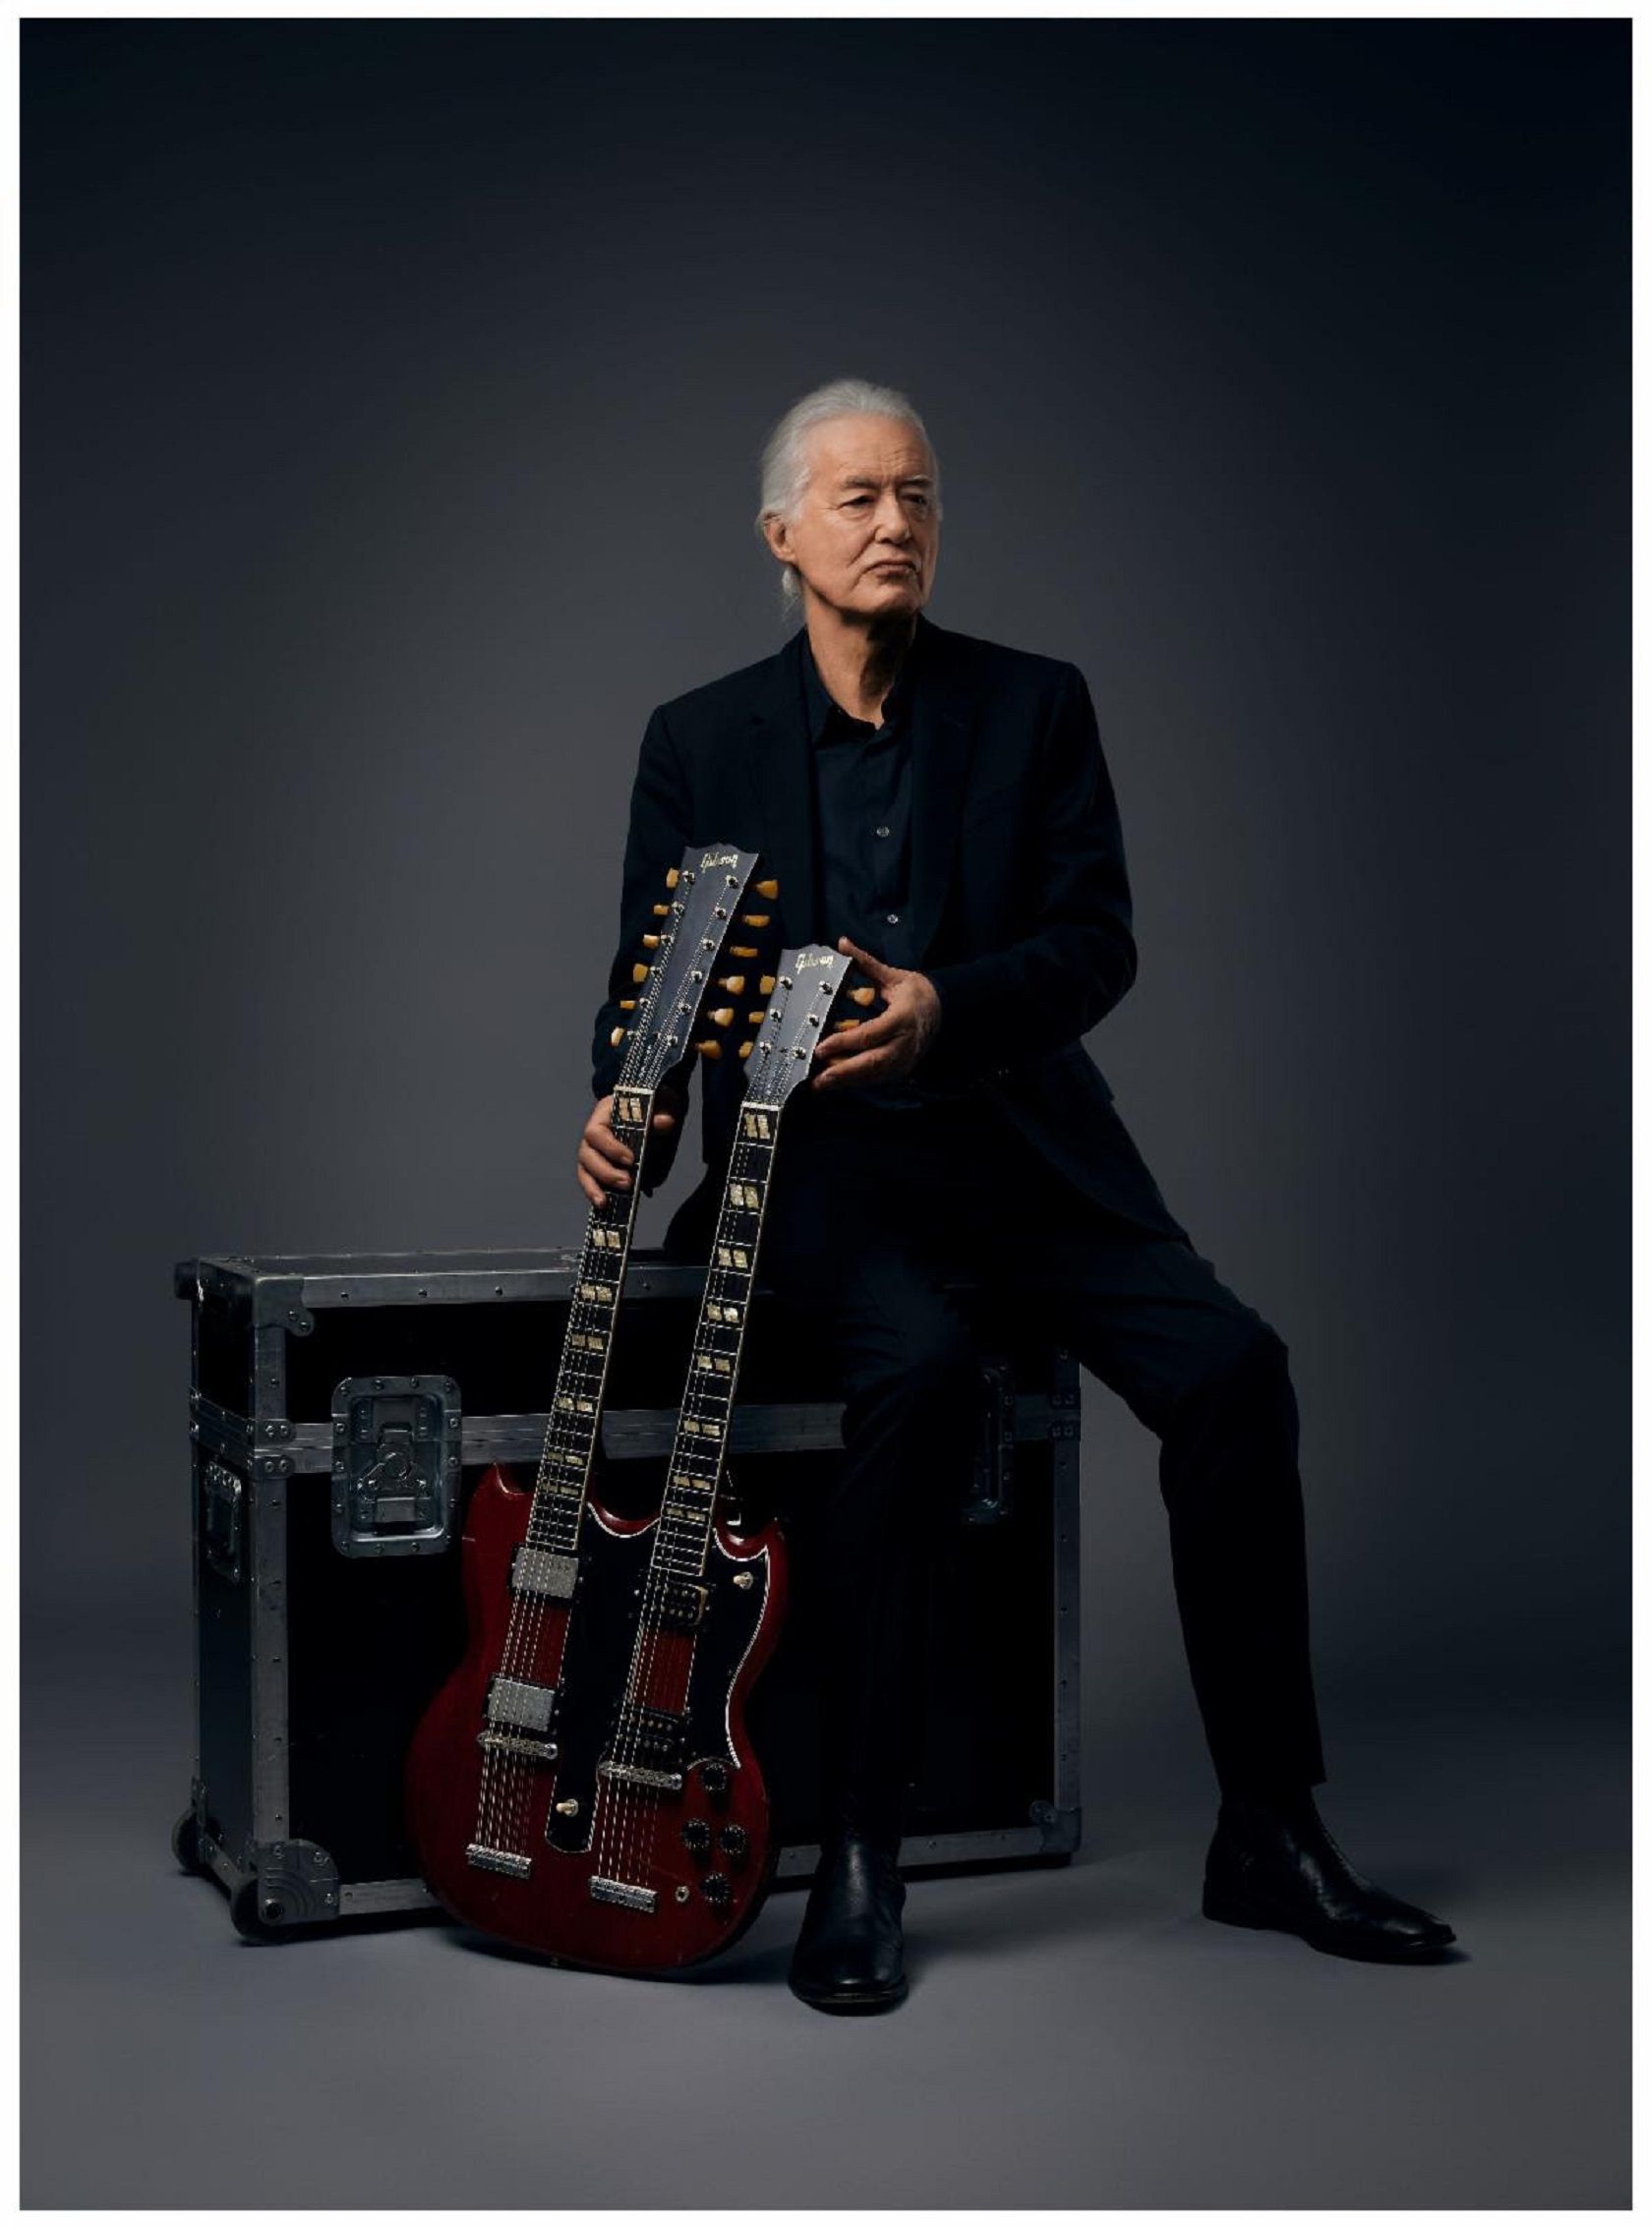 Gibson Announces Jimmy Page 1969 EDS-1275 Doubleneck Collector’s Edition; One of the Most Recognized Guitars in Rock History, Hand-Signed and Played by the iconic Jimmy Page